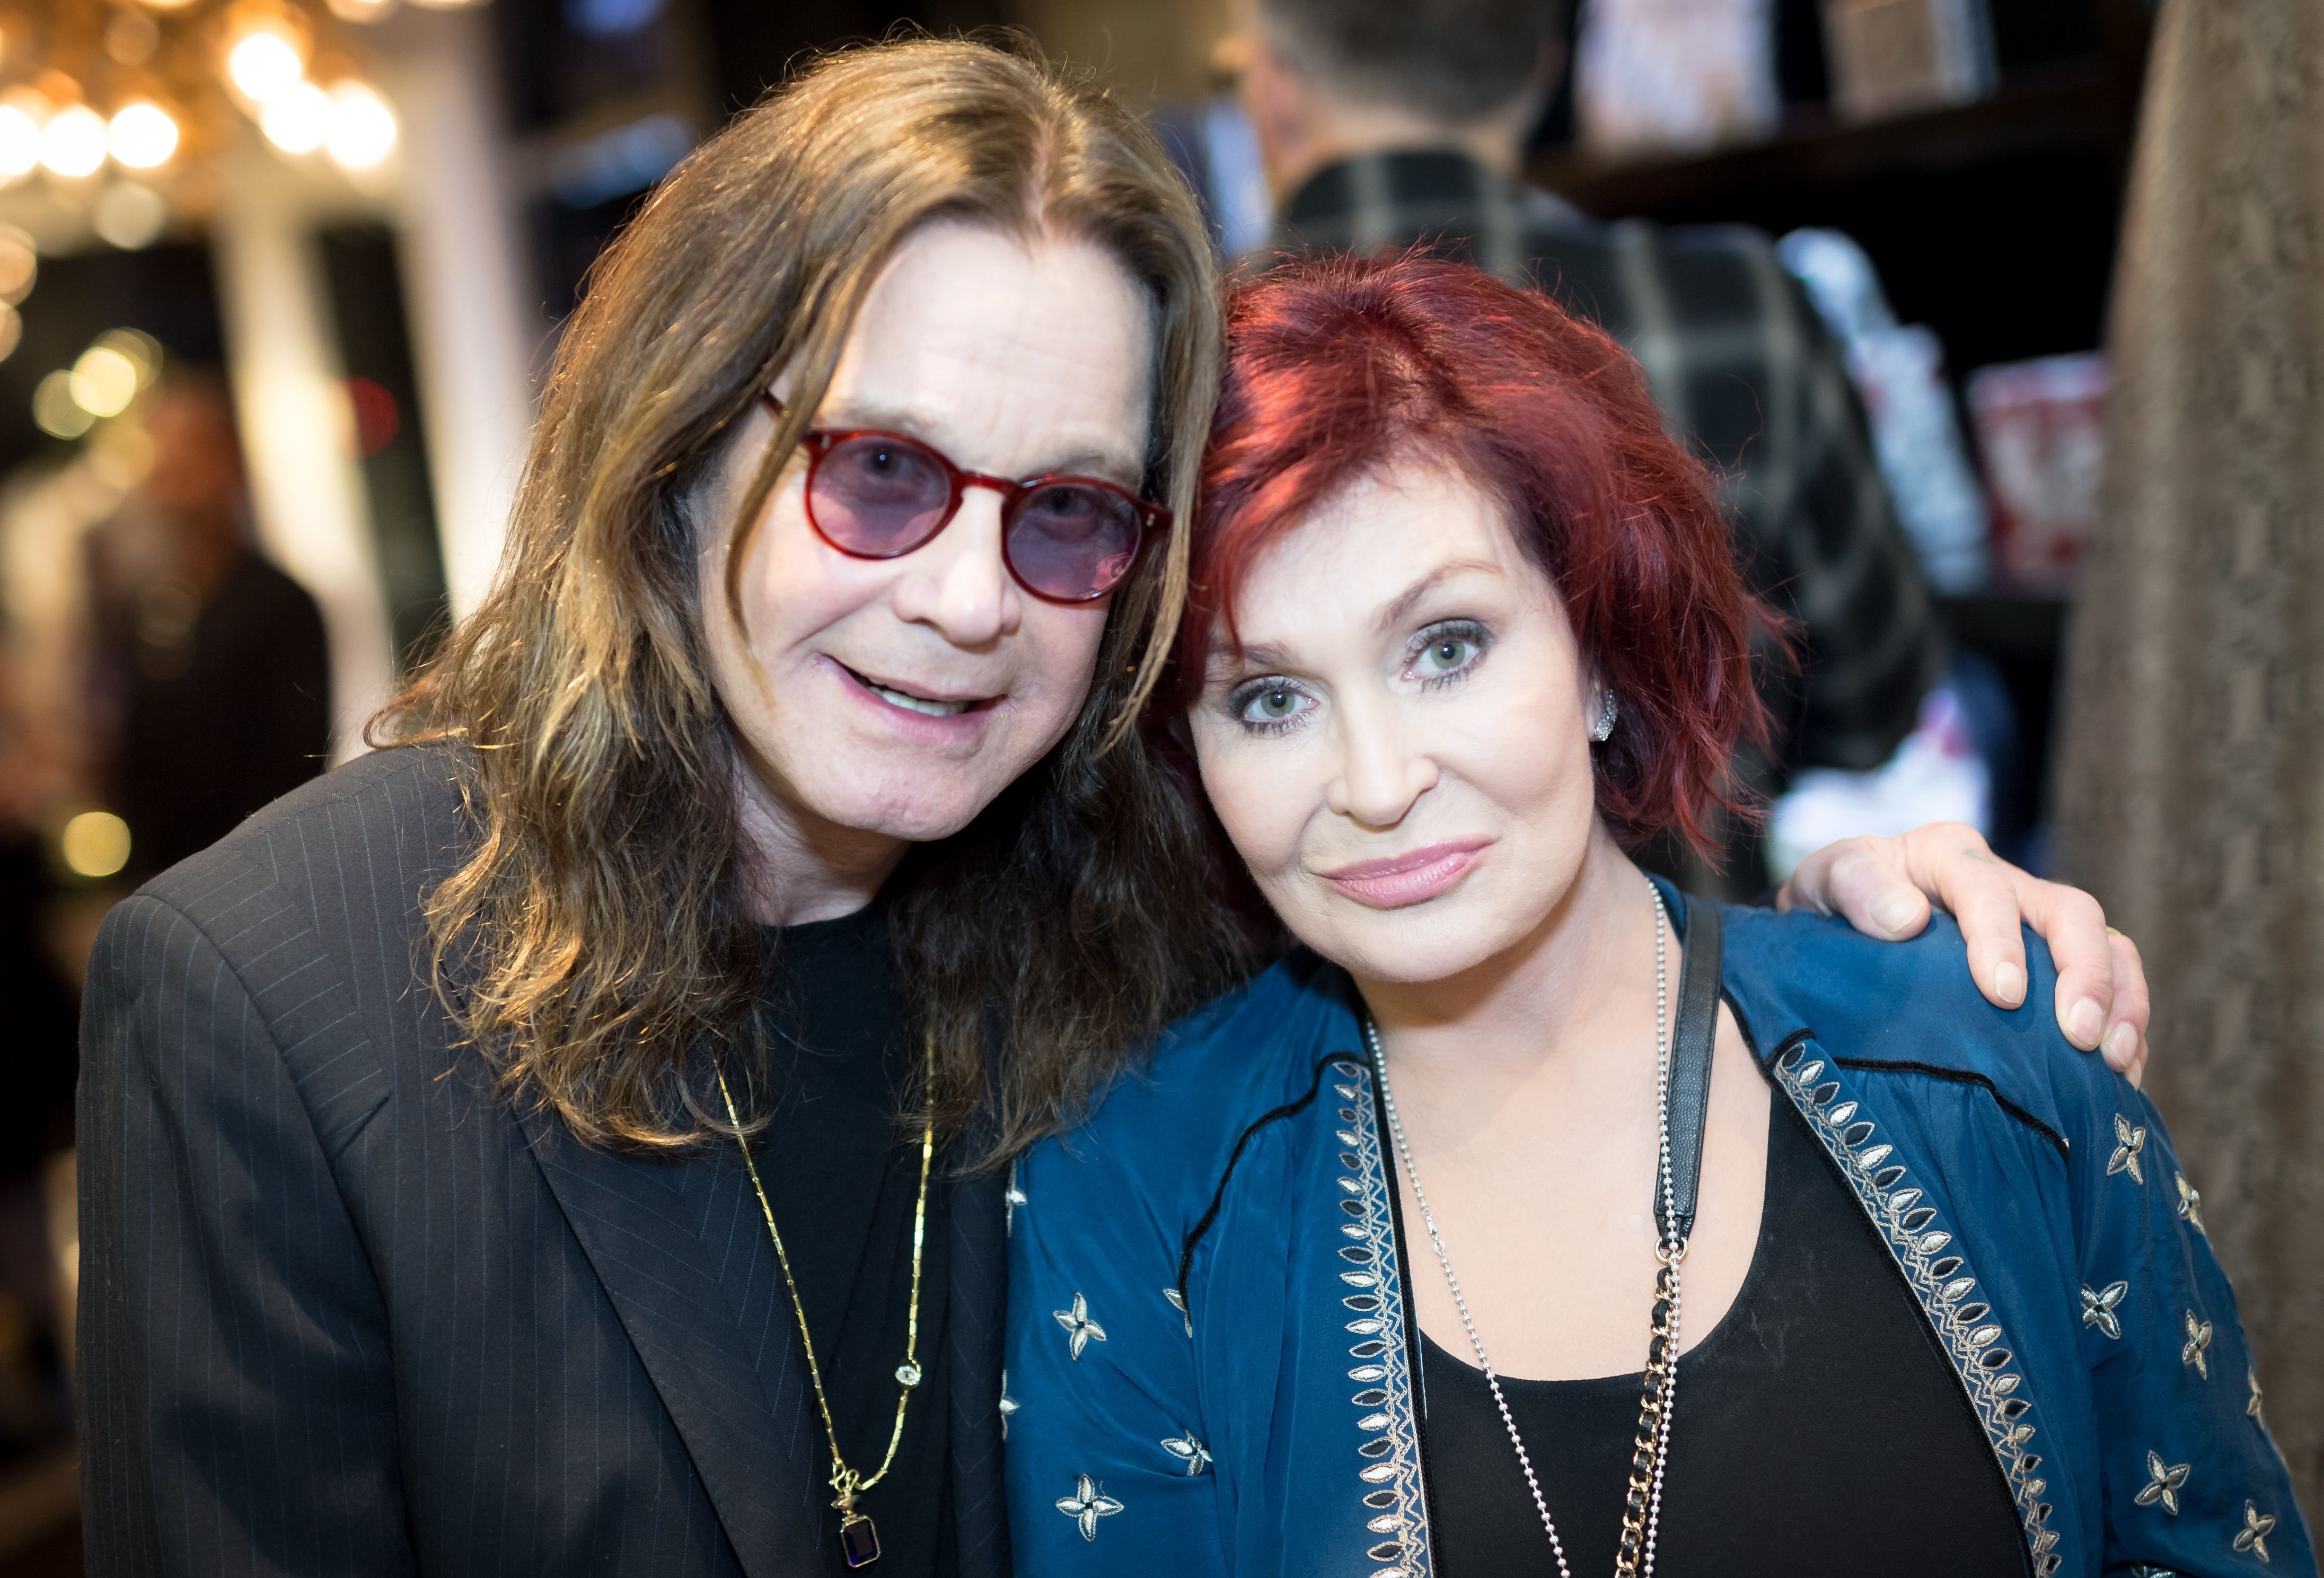 Ozzy and Sharon Osbourne at the Billy Morrison - Aude Somnia Solo Exhibition at Elisabeth Weinstock on September 28, 2017 in Los Angeles, California. | Photo: Getty Images